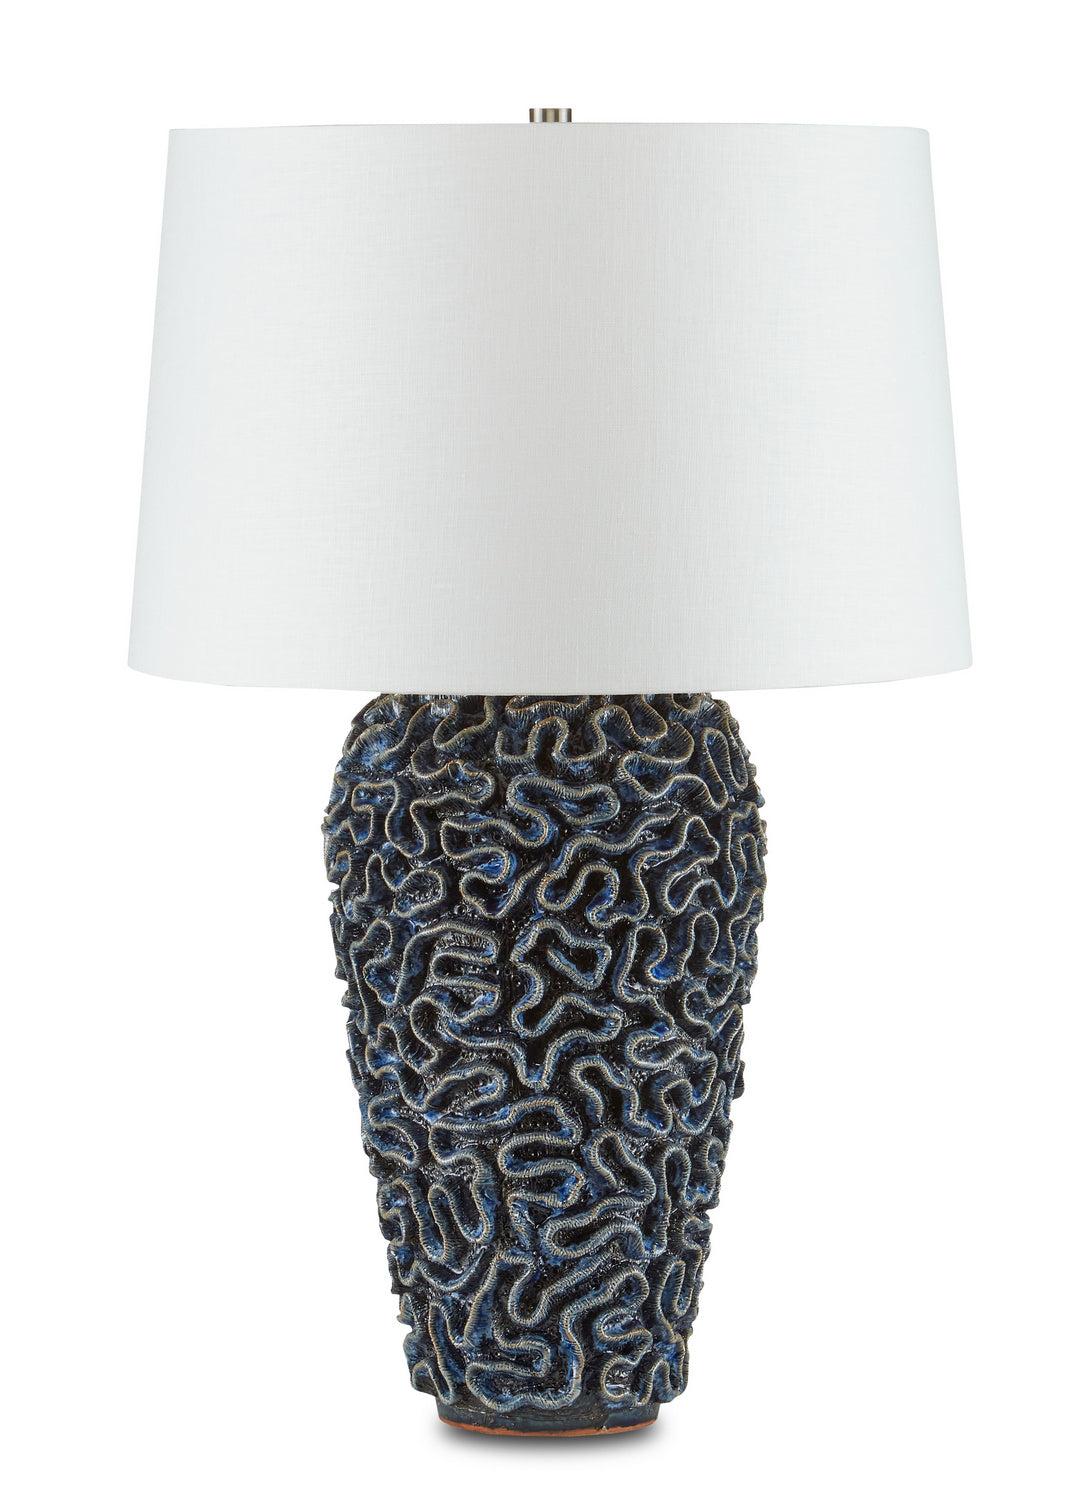 One Light Table Lamp from the Milos collection in Blue finish